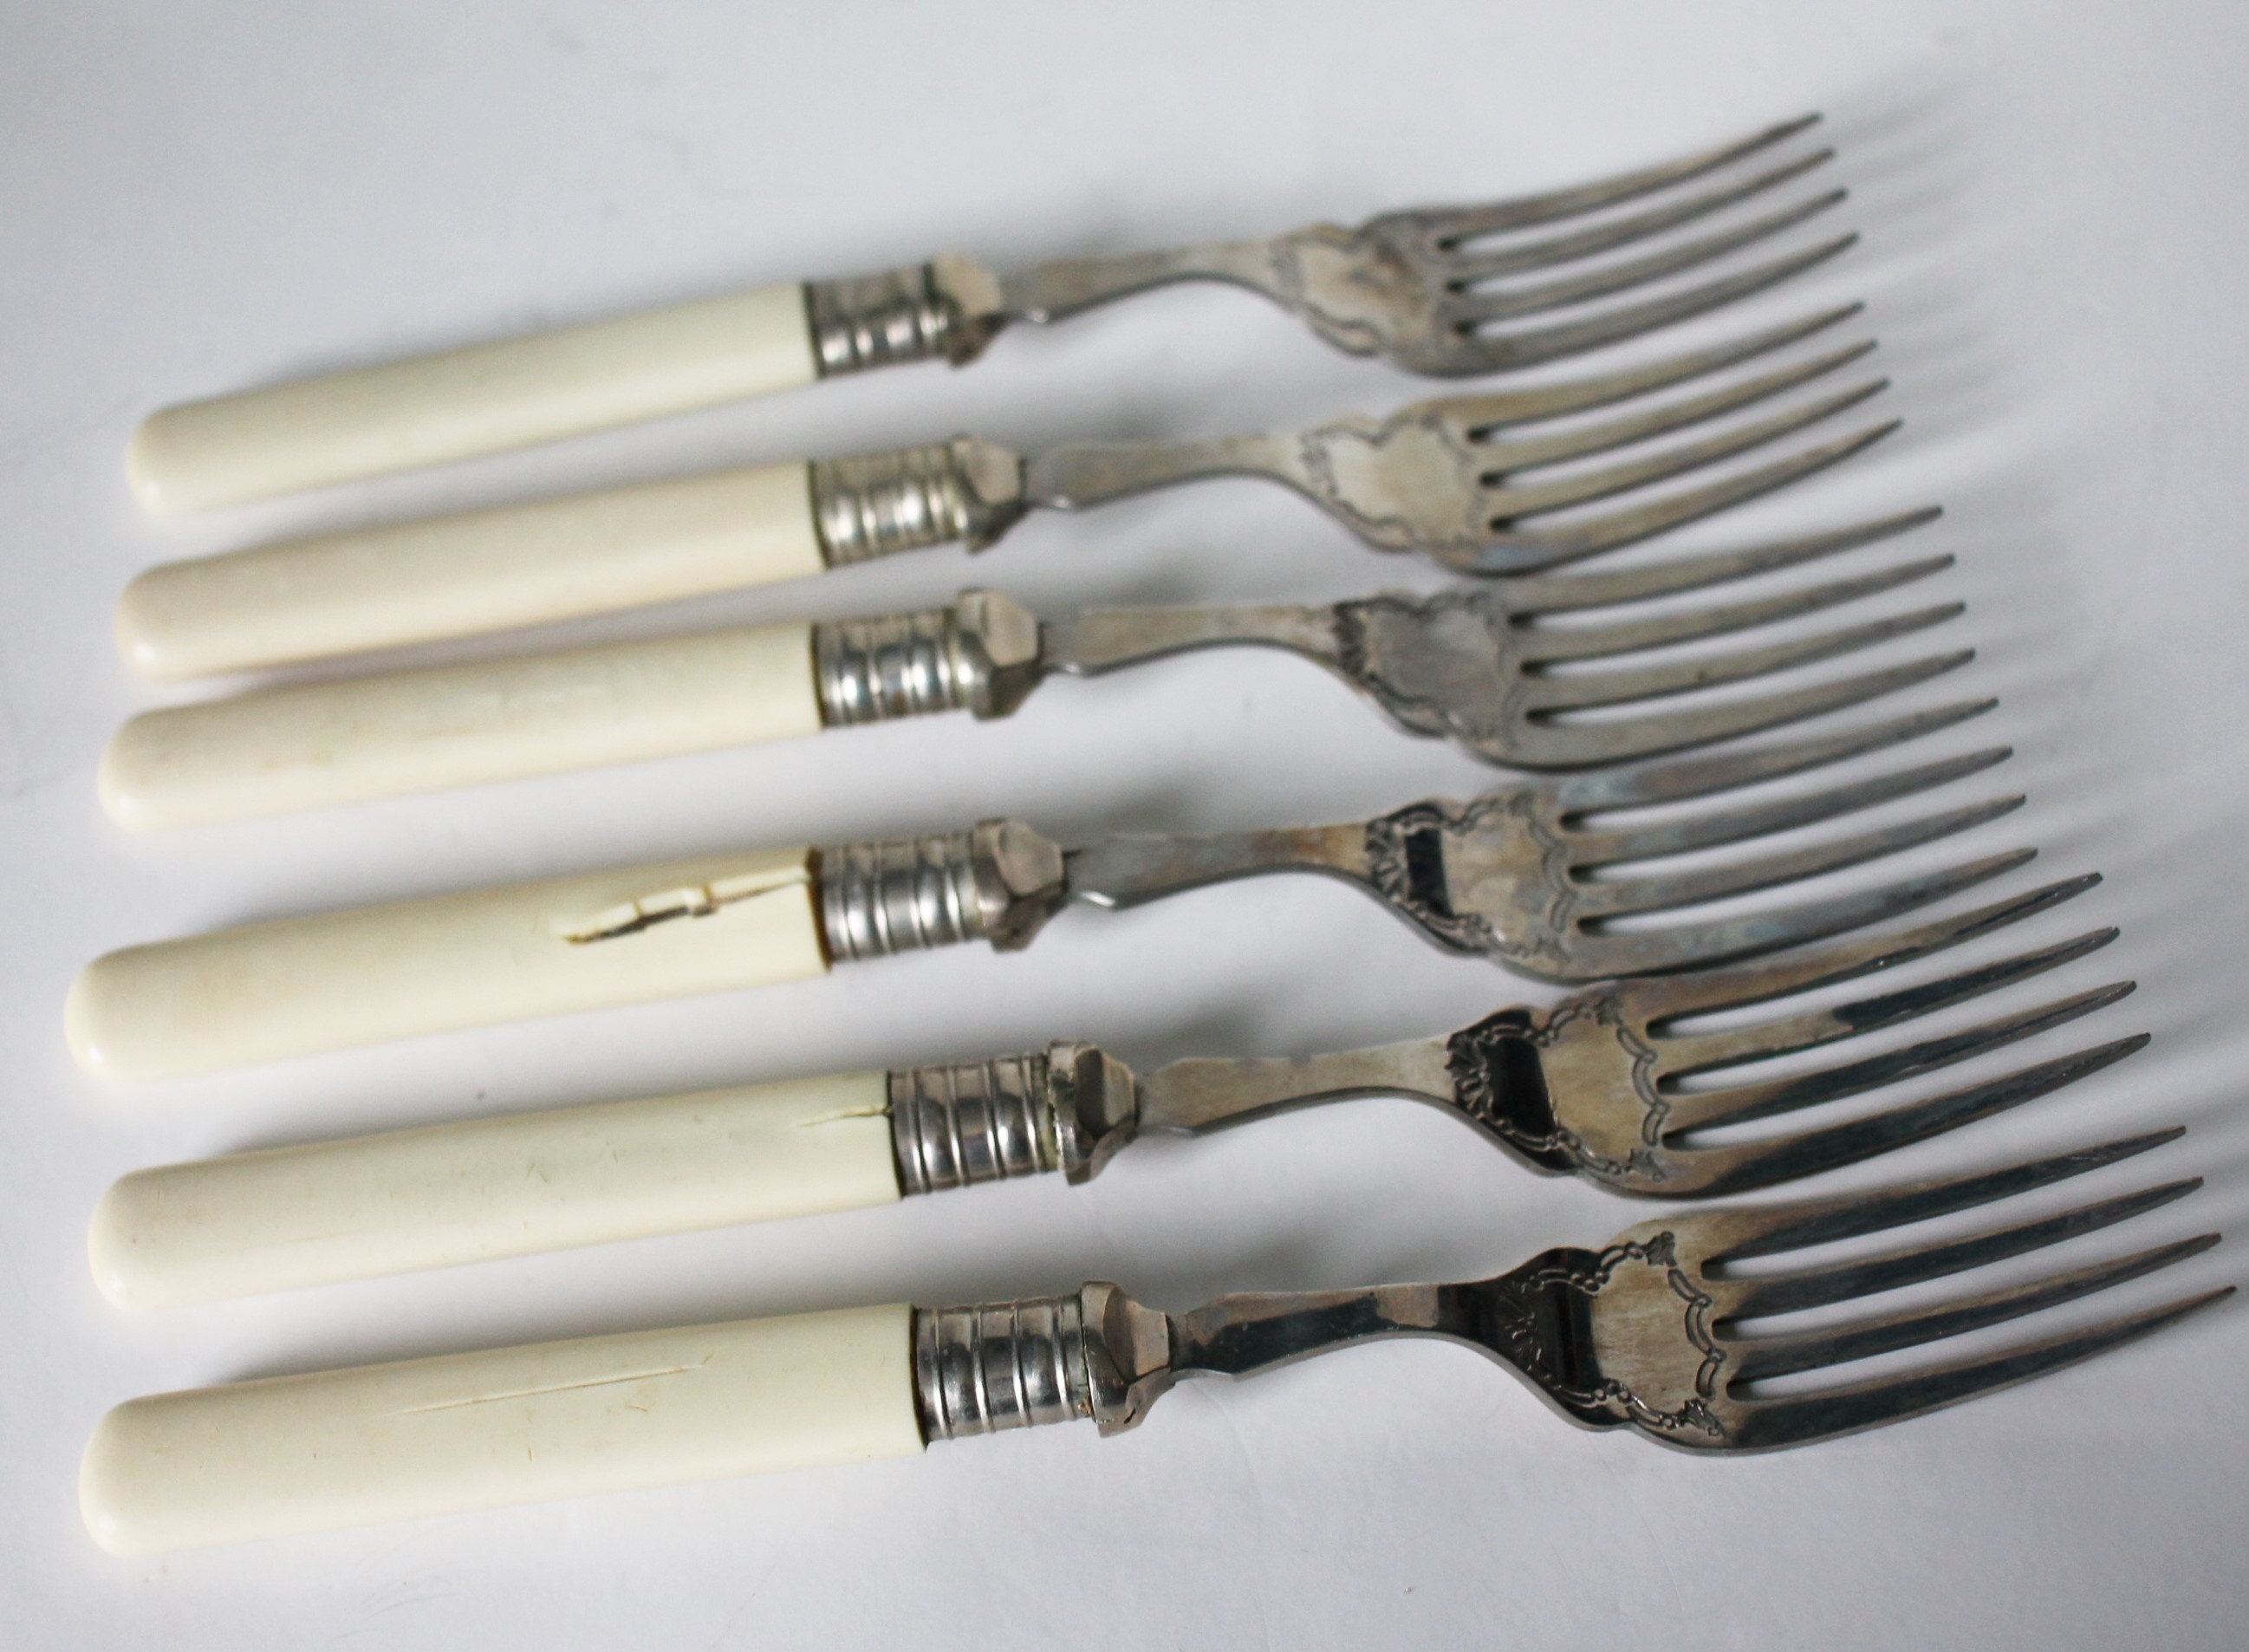 Forks and Knives Set / Vintage Small Forks and Knives 12 Pieces